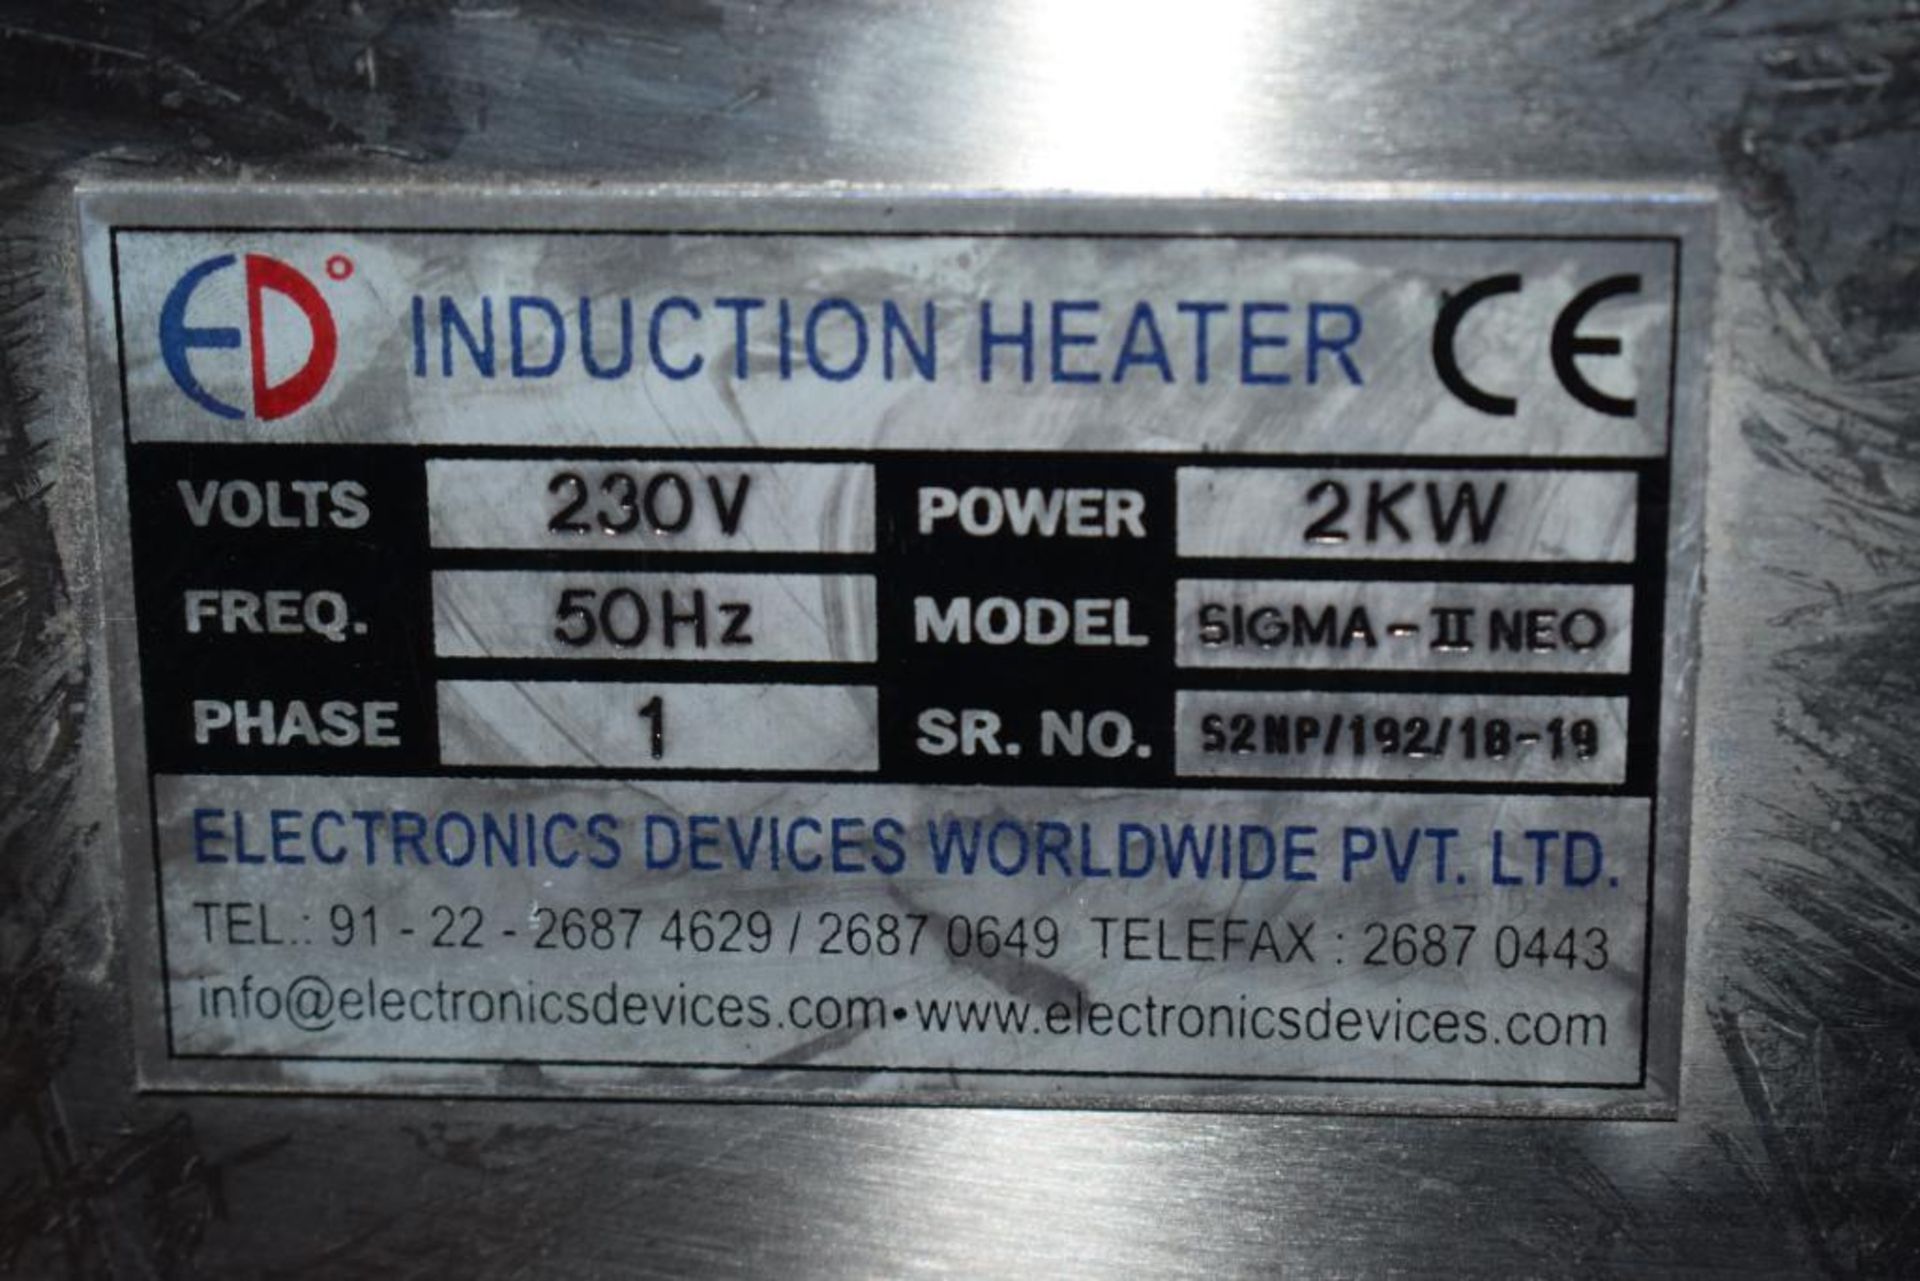 Electronics Devices 2KW Induction Heater, Model Sigma-II NEO. Serial# 52NP/192/18-19. Mounted on a f - Image 7 of 7